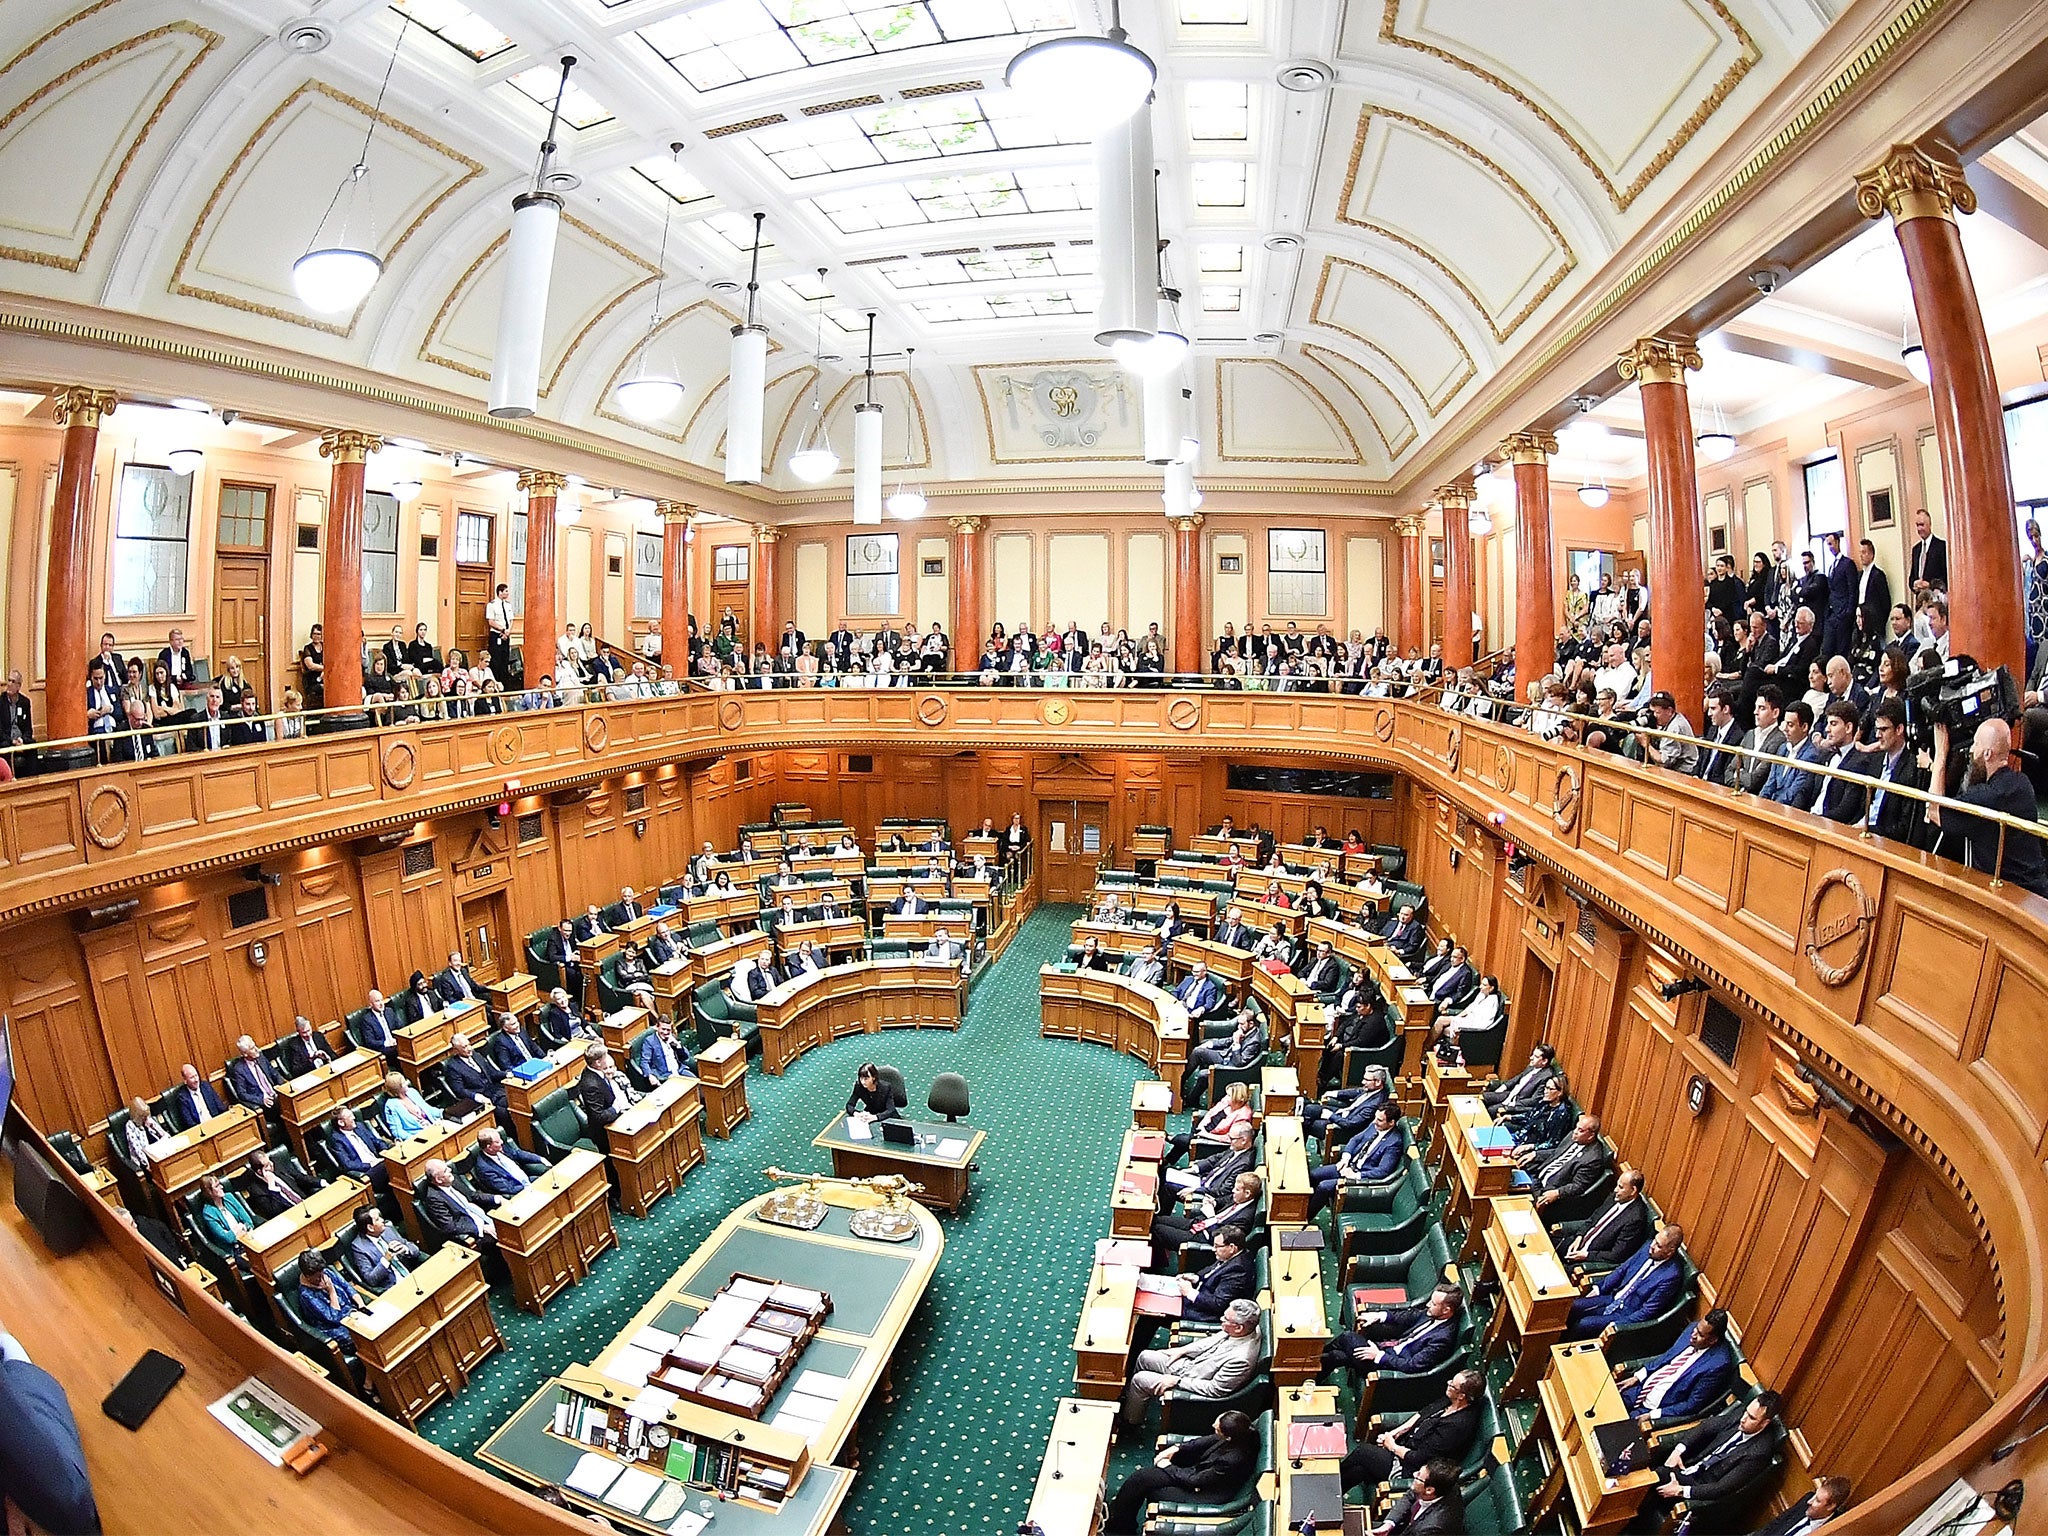 New Zealand's parliament in Wellington was evacuated on Tuesday following a 6.1-magnitude earthquake